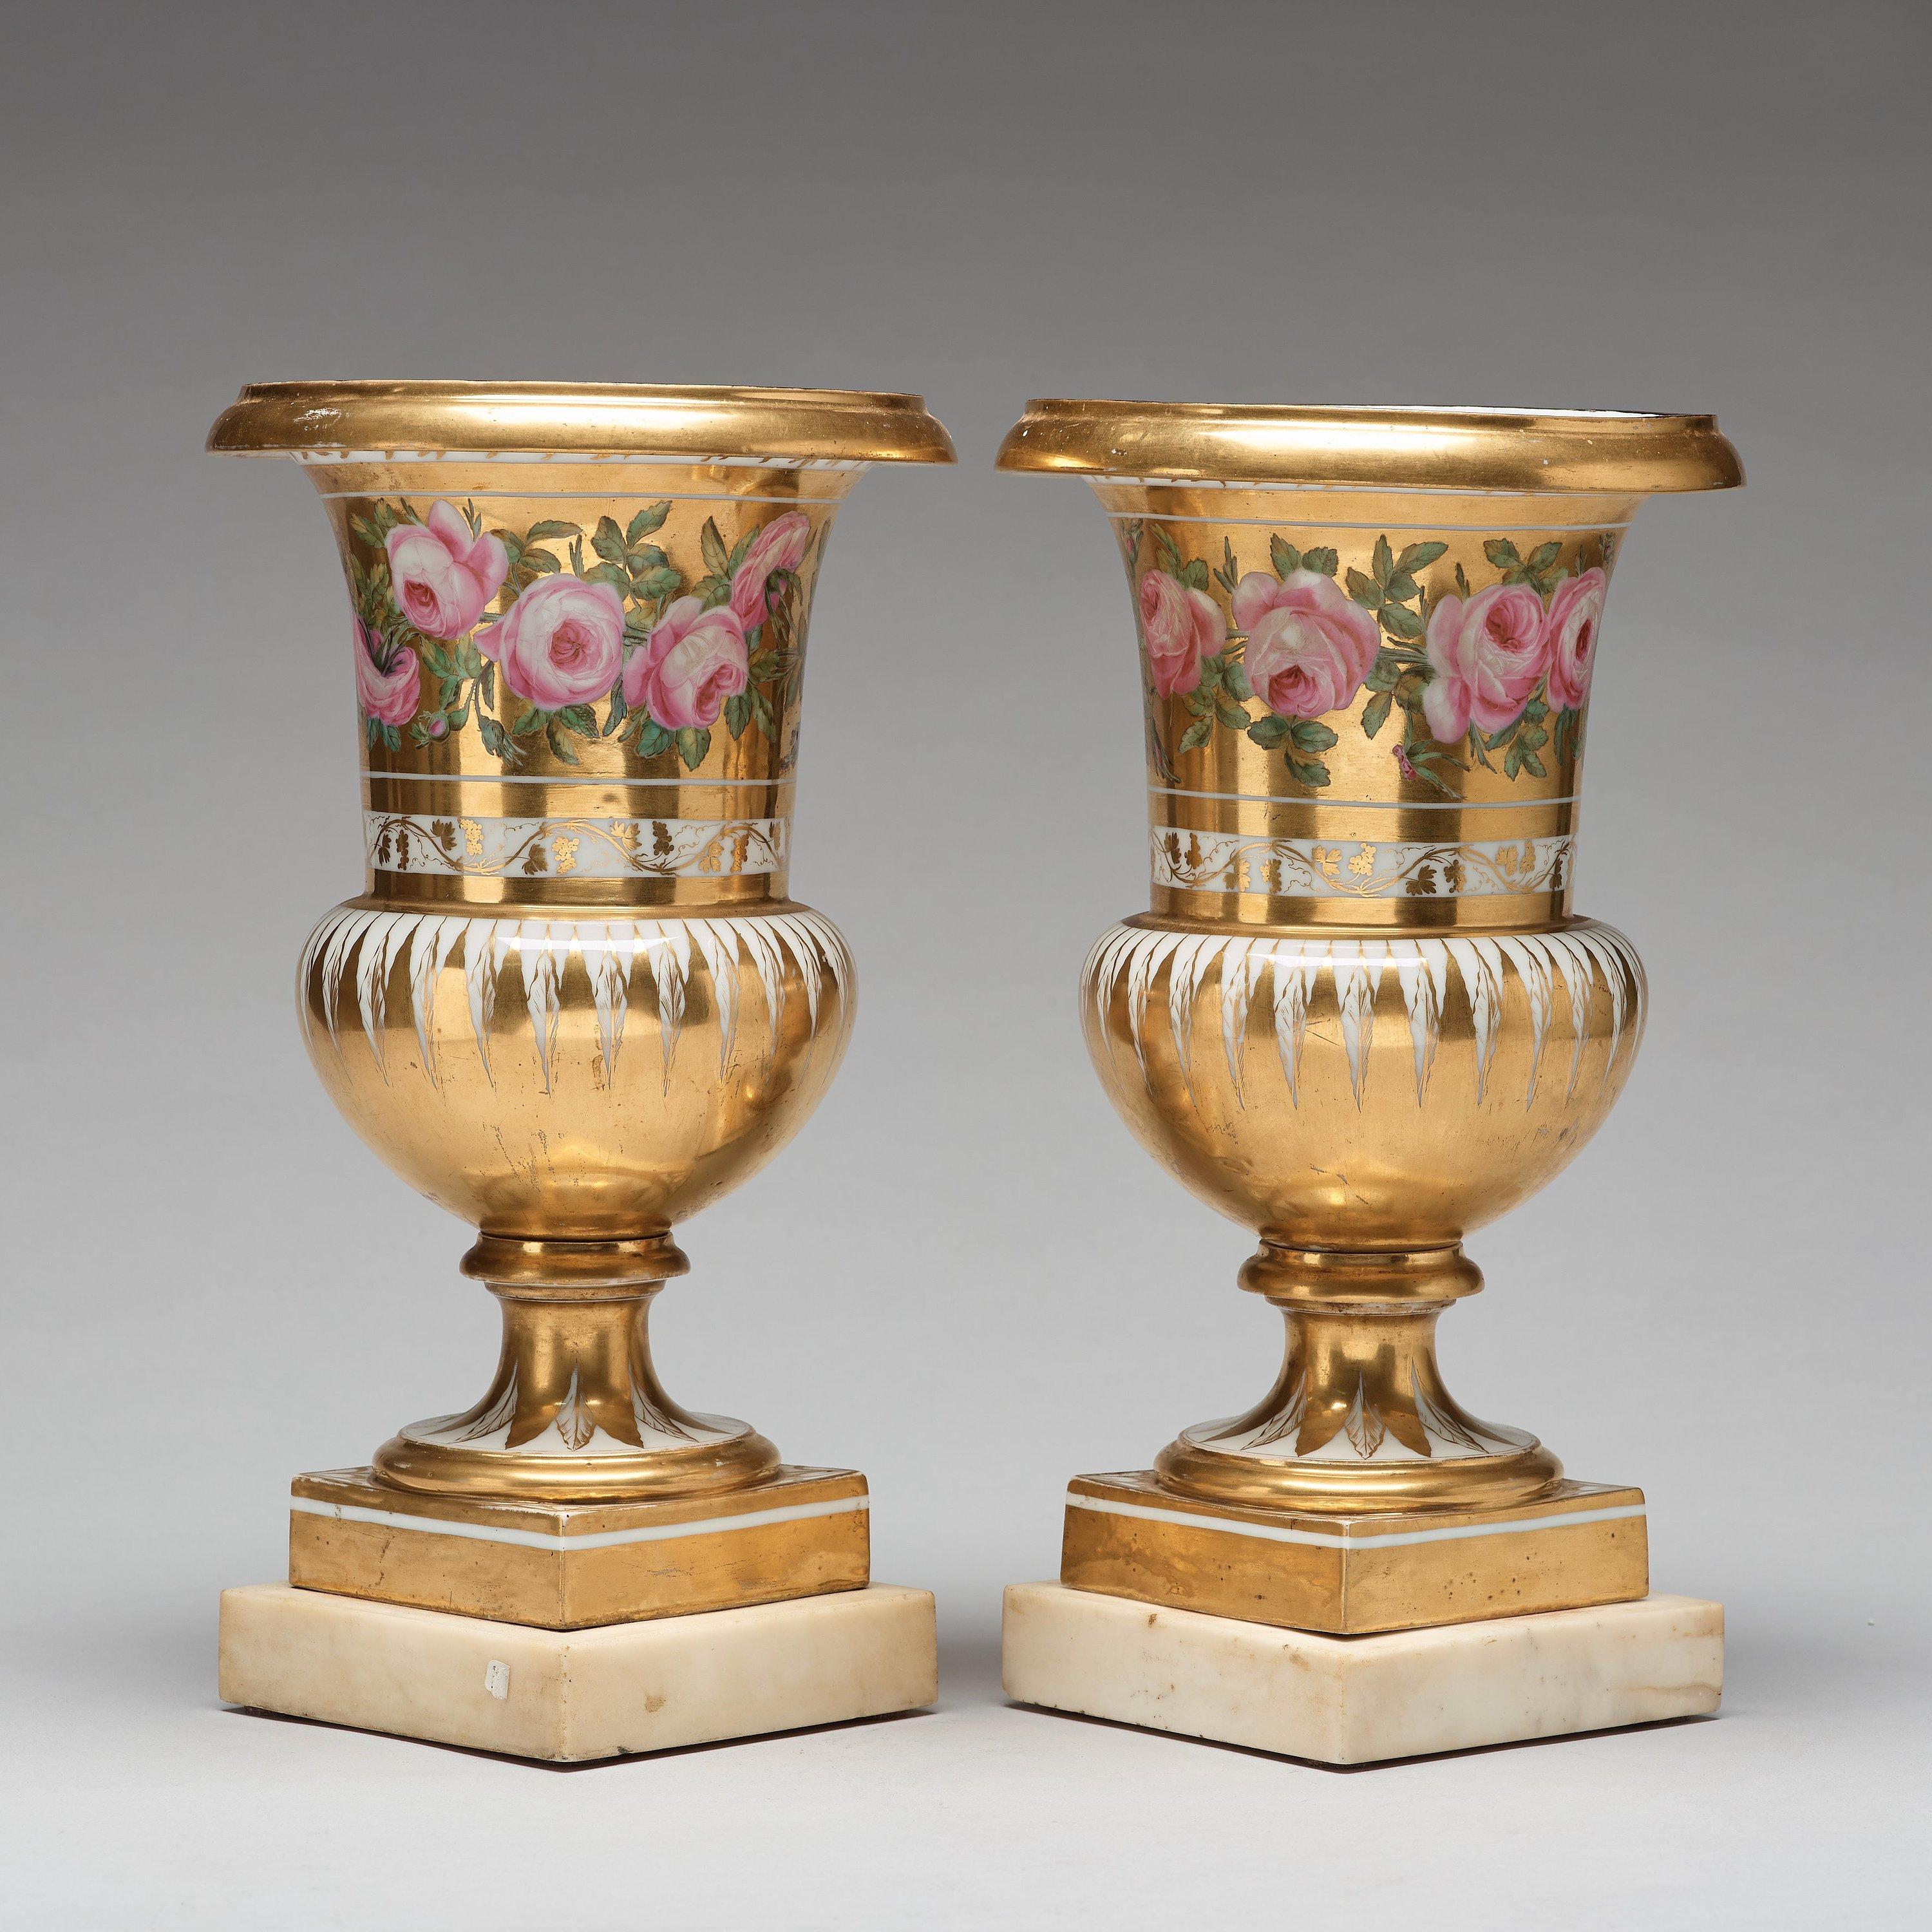 Empire Pair of French Porcelain Gold-Ground and Flower Painted Vases, 19th Century